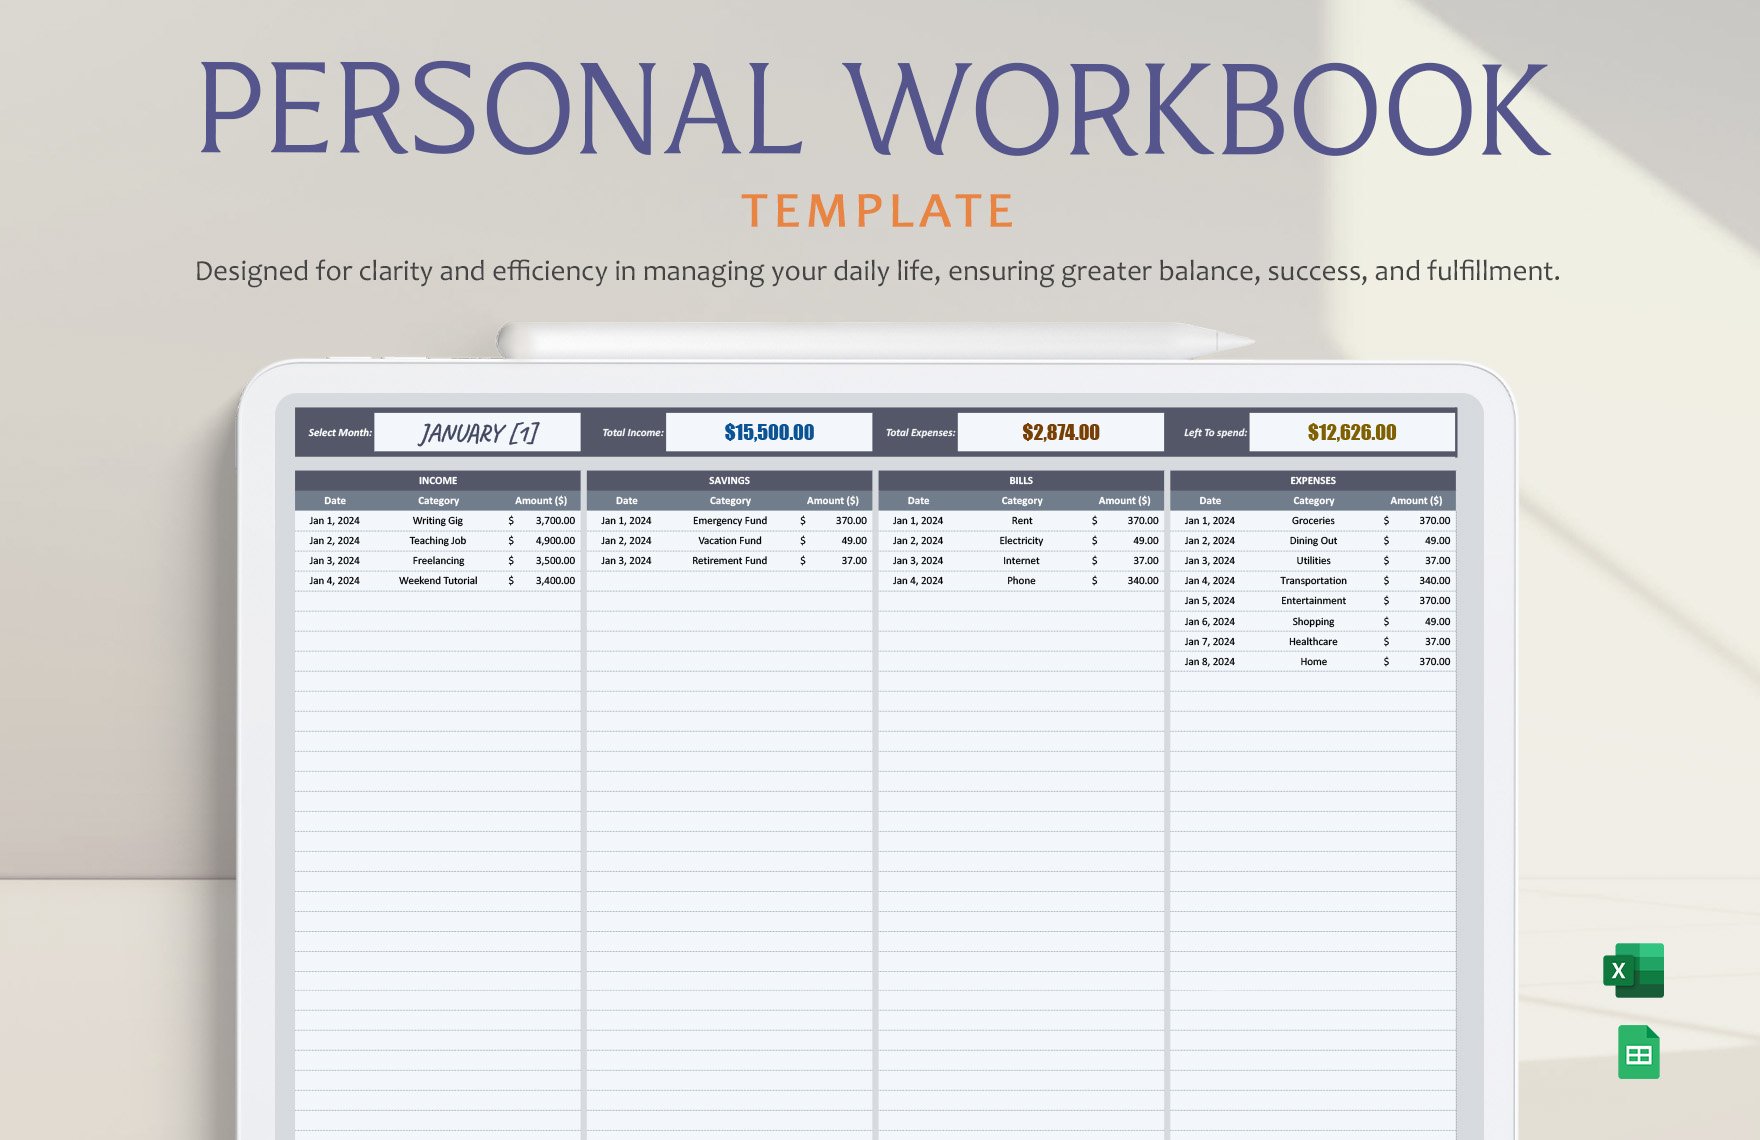 Personal Workbook Template in Excel, Google Sheets